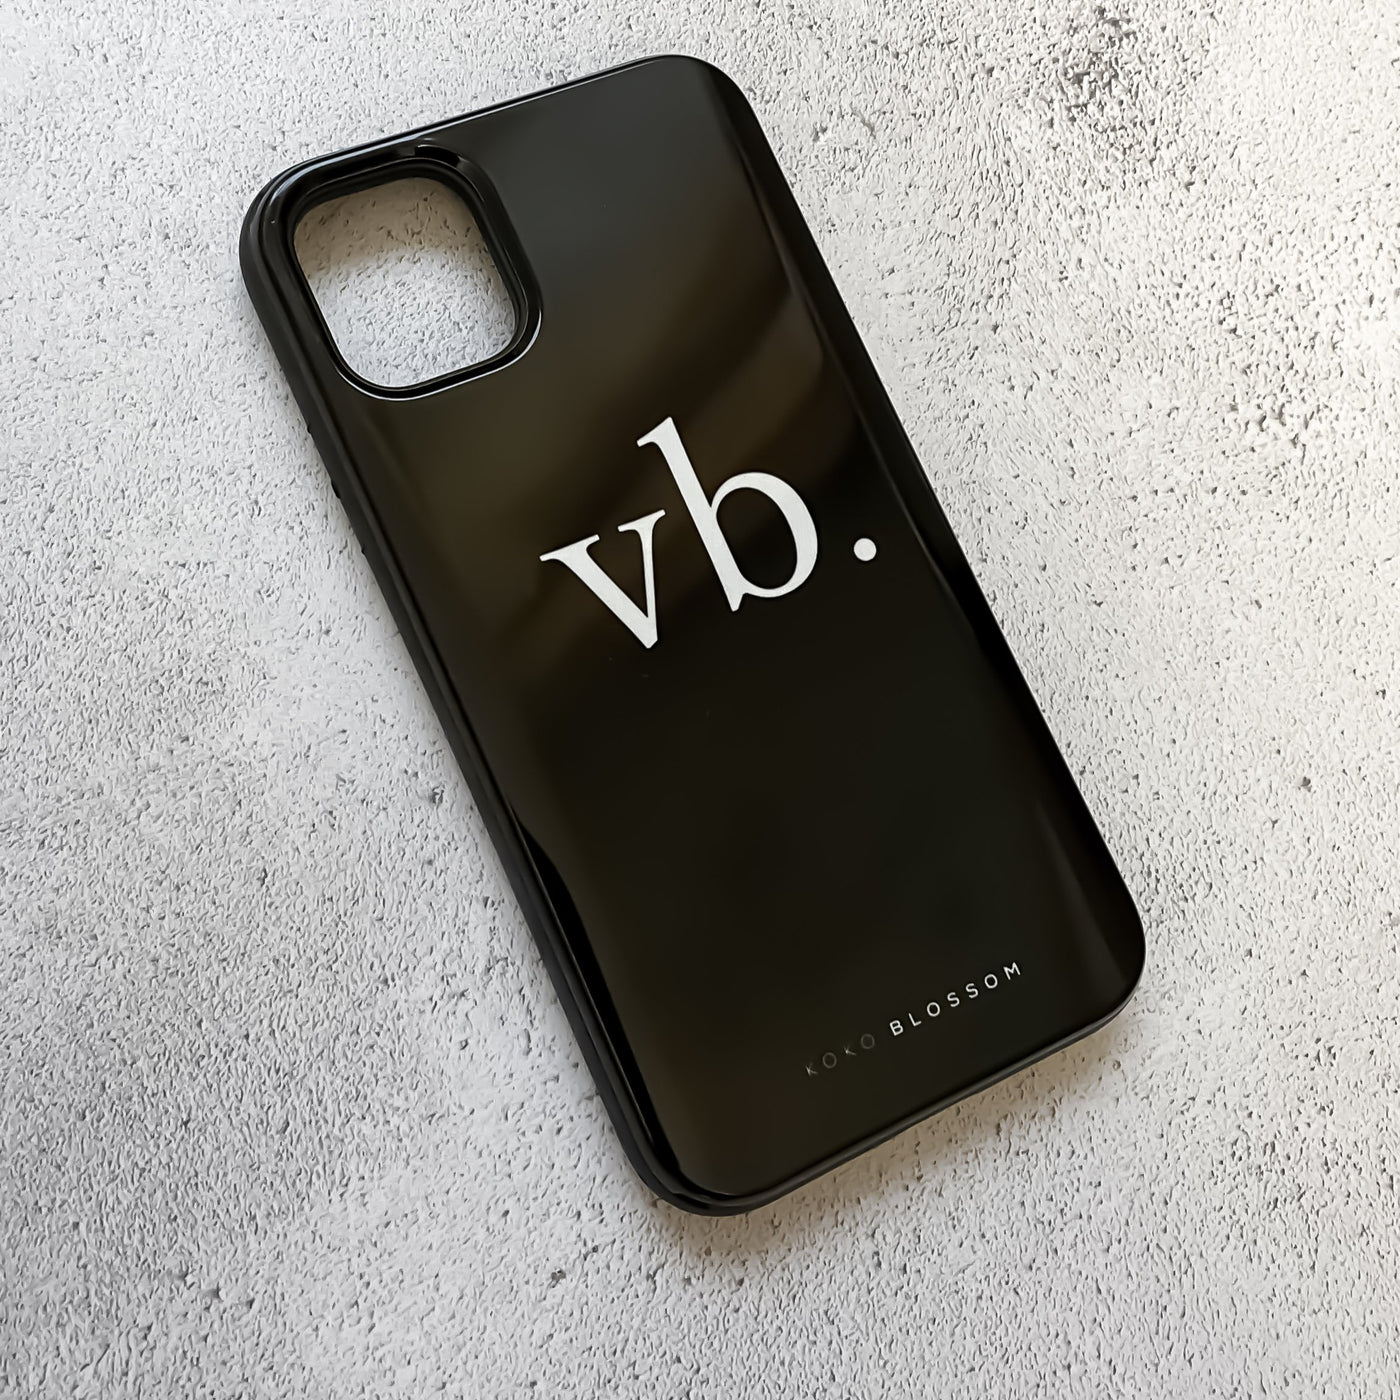 black phone case with VB in the middle.